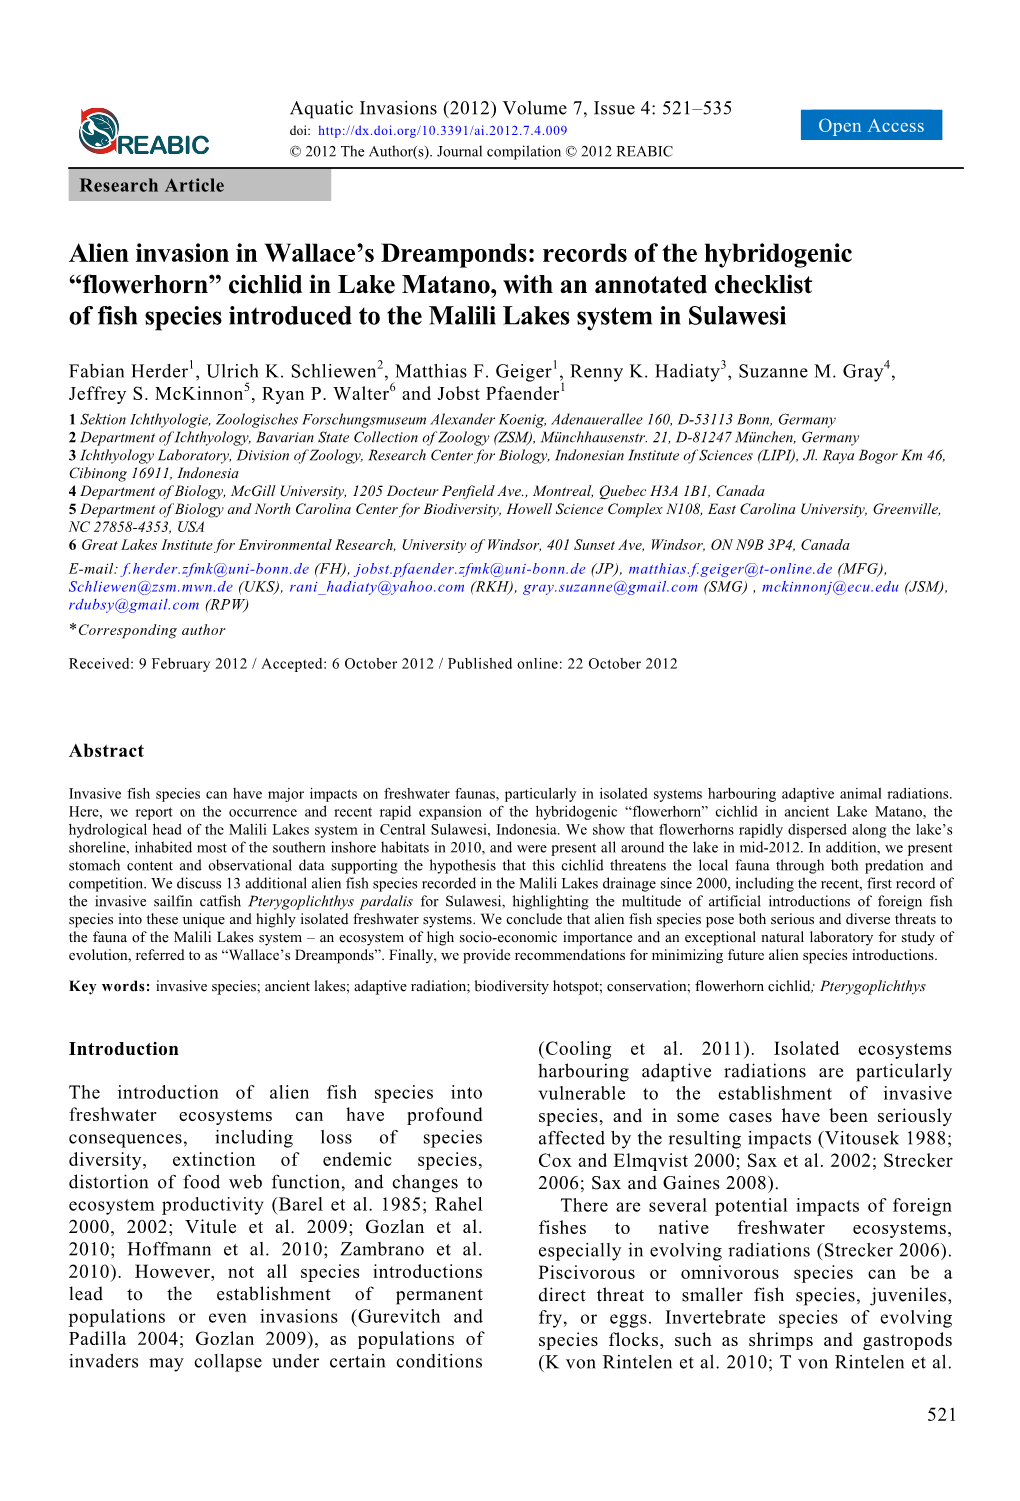 Flowerhorn” Cichlid in Lake Matano, with an Annotated Checklist of Fish Species Introduced to the Malili Lakes System in Sulawesi